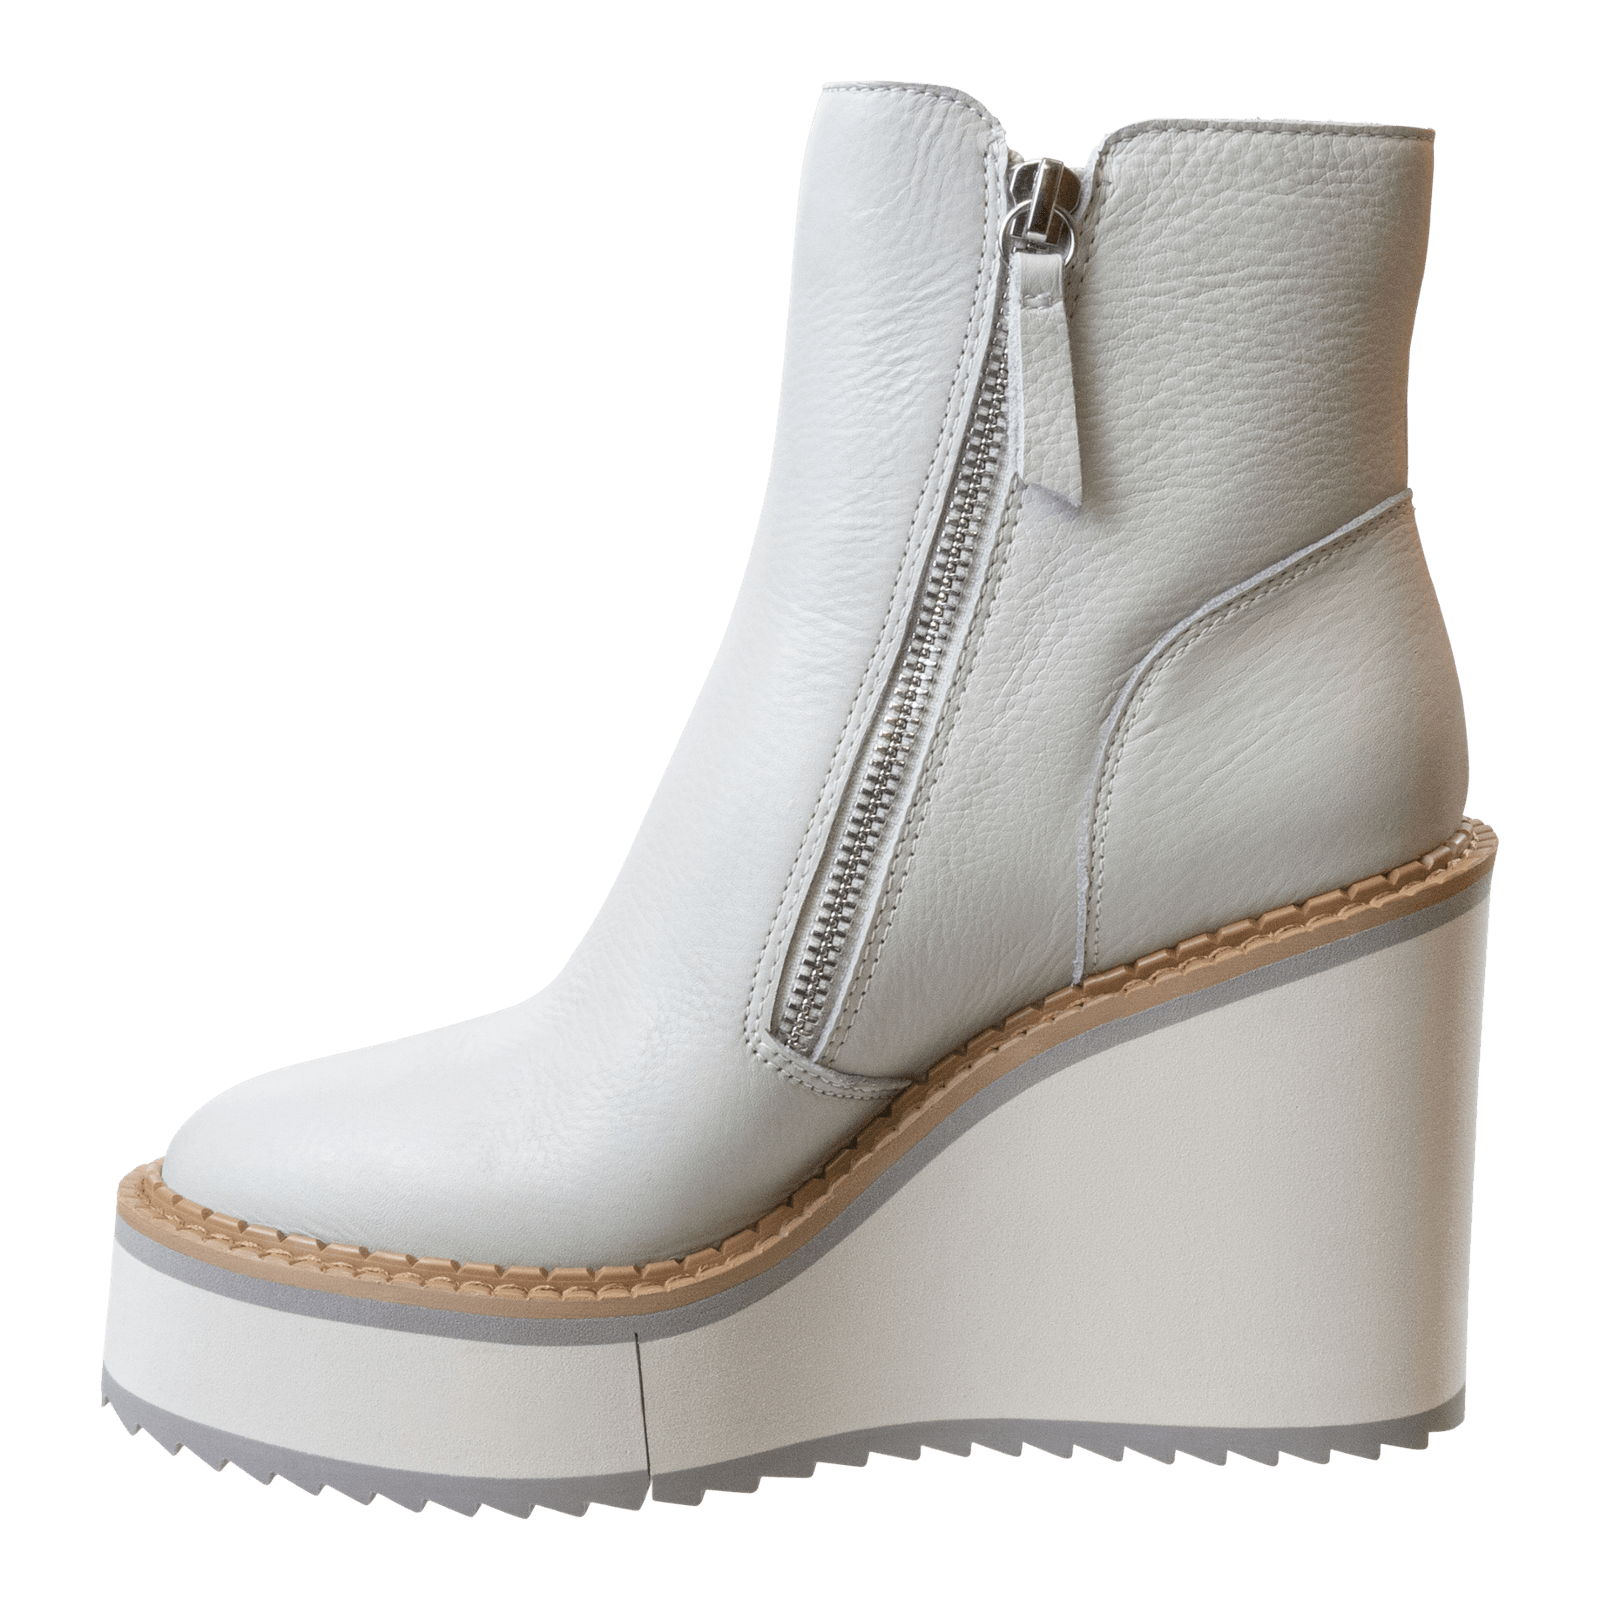 NAKED FEET - AVAIL in MIST Wedge Ankle Boots WOMEN FOOTWEAR NAKED FEET 